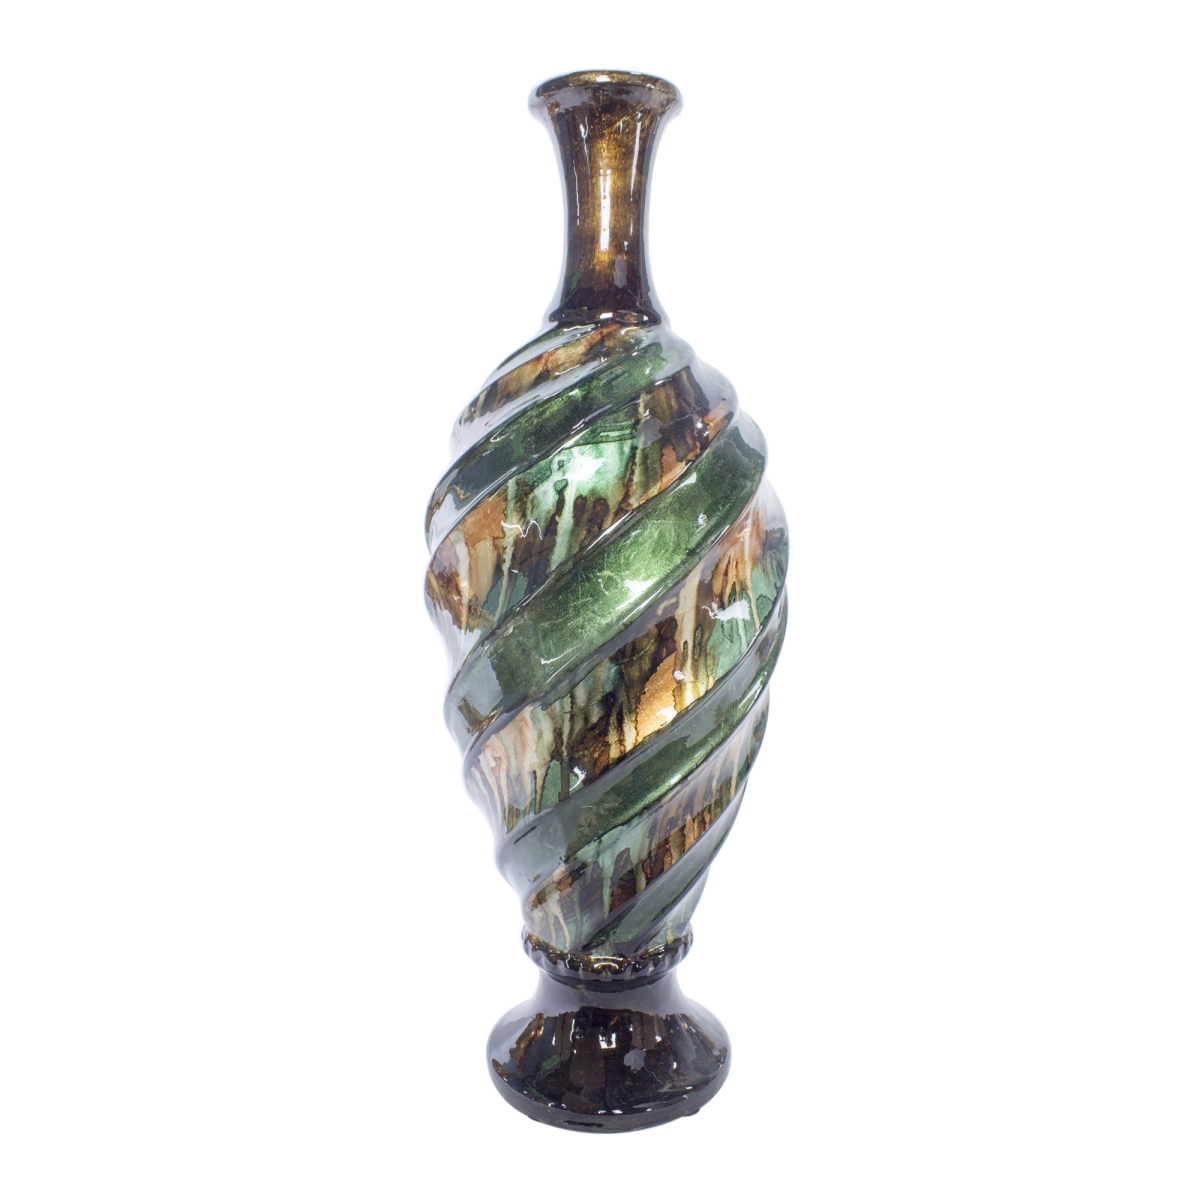 W085052-04 Twist Foiled & Lacquered Ceramic Turned & Ridged Bud Vase, Green